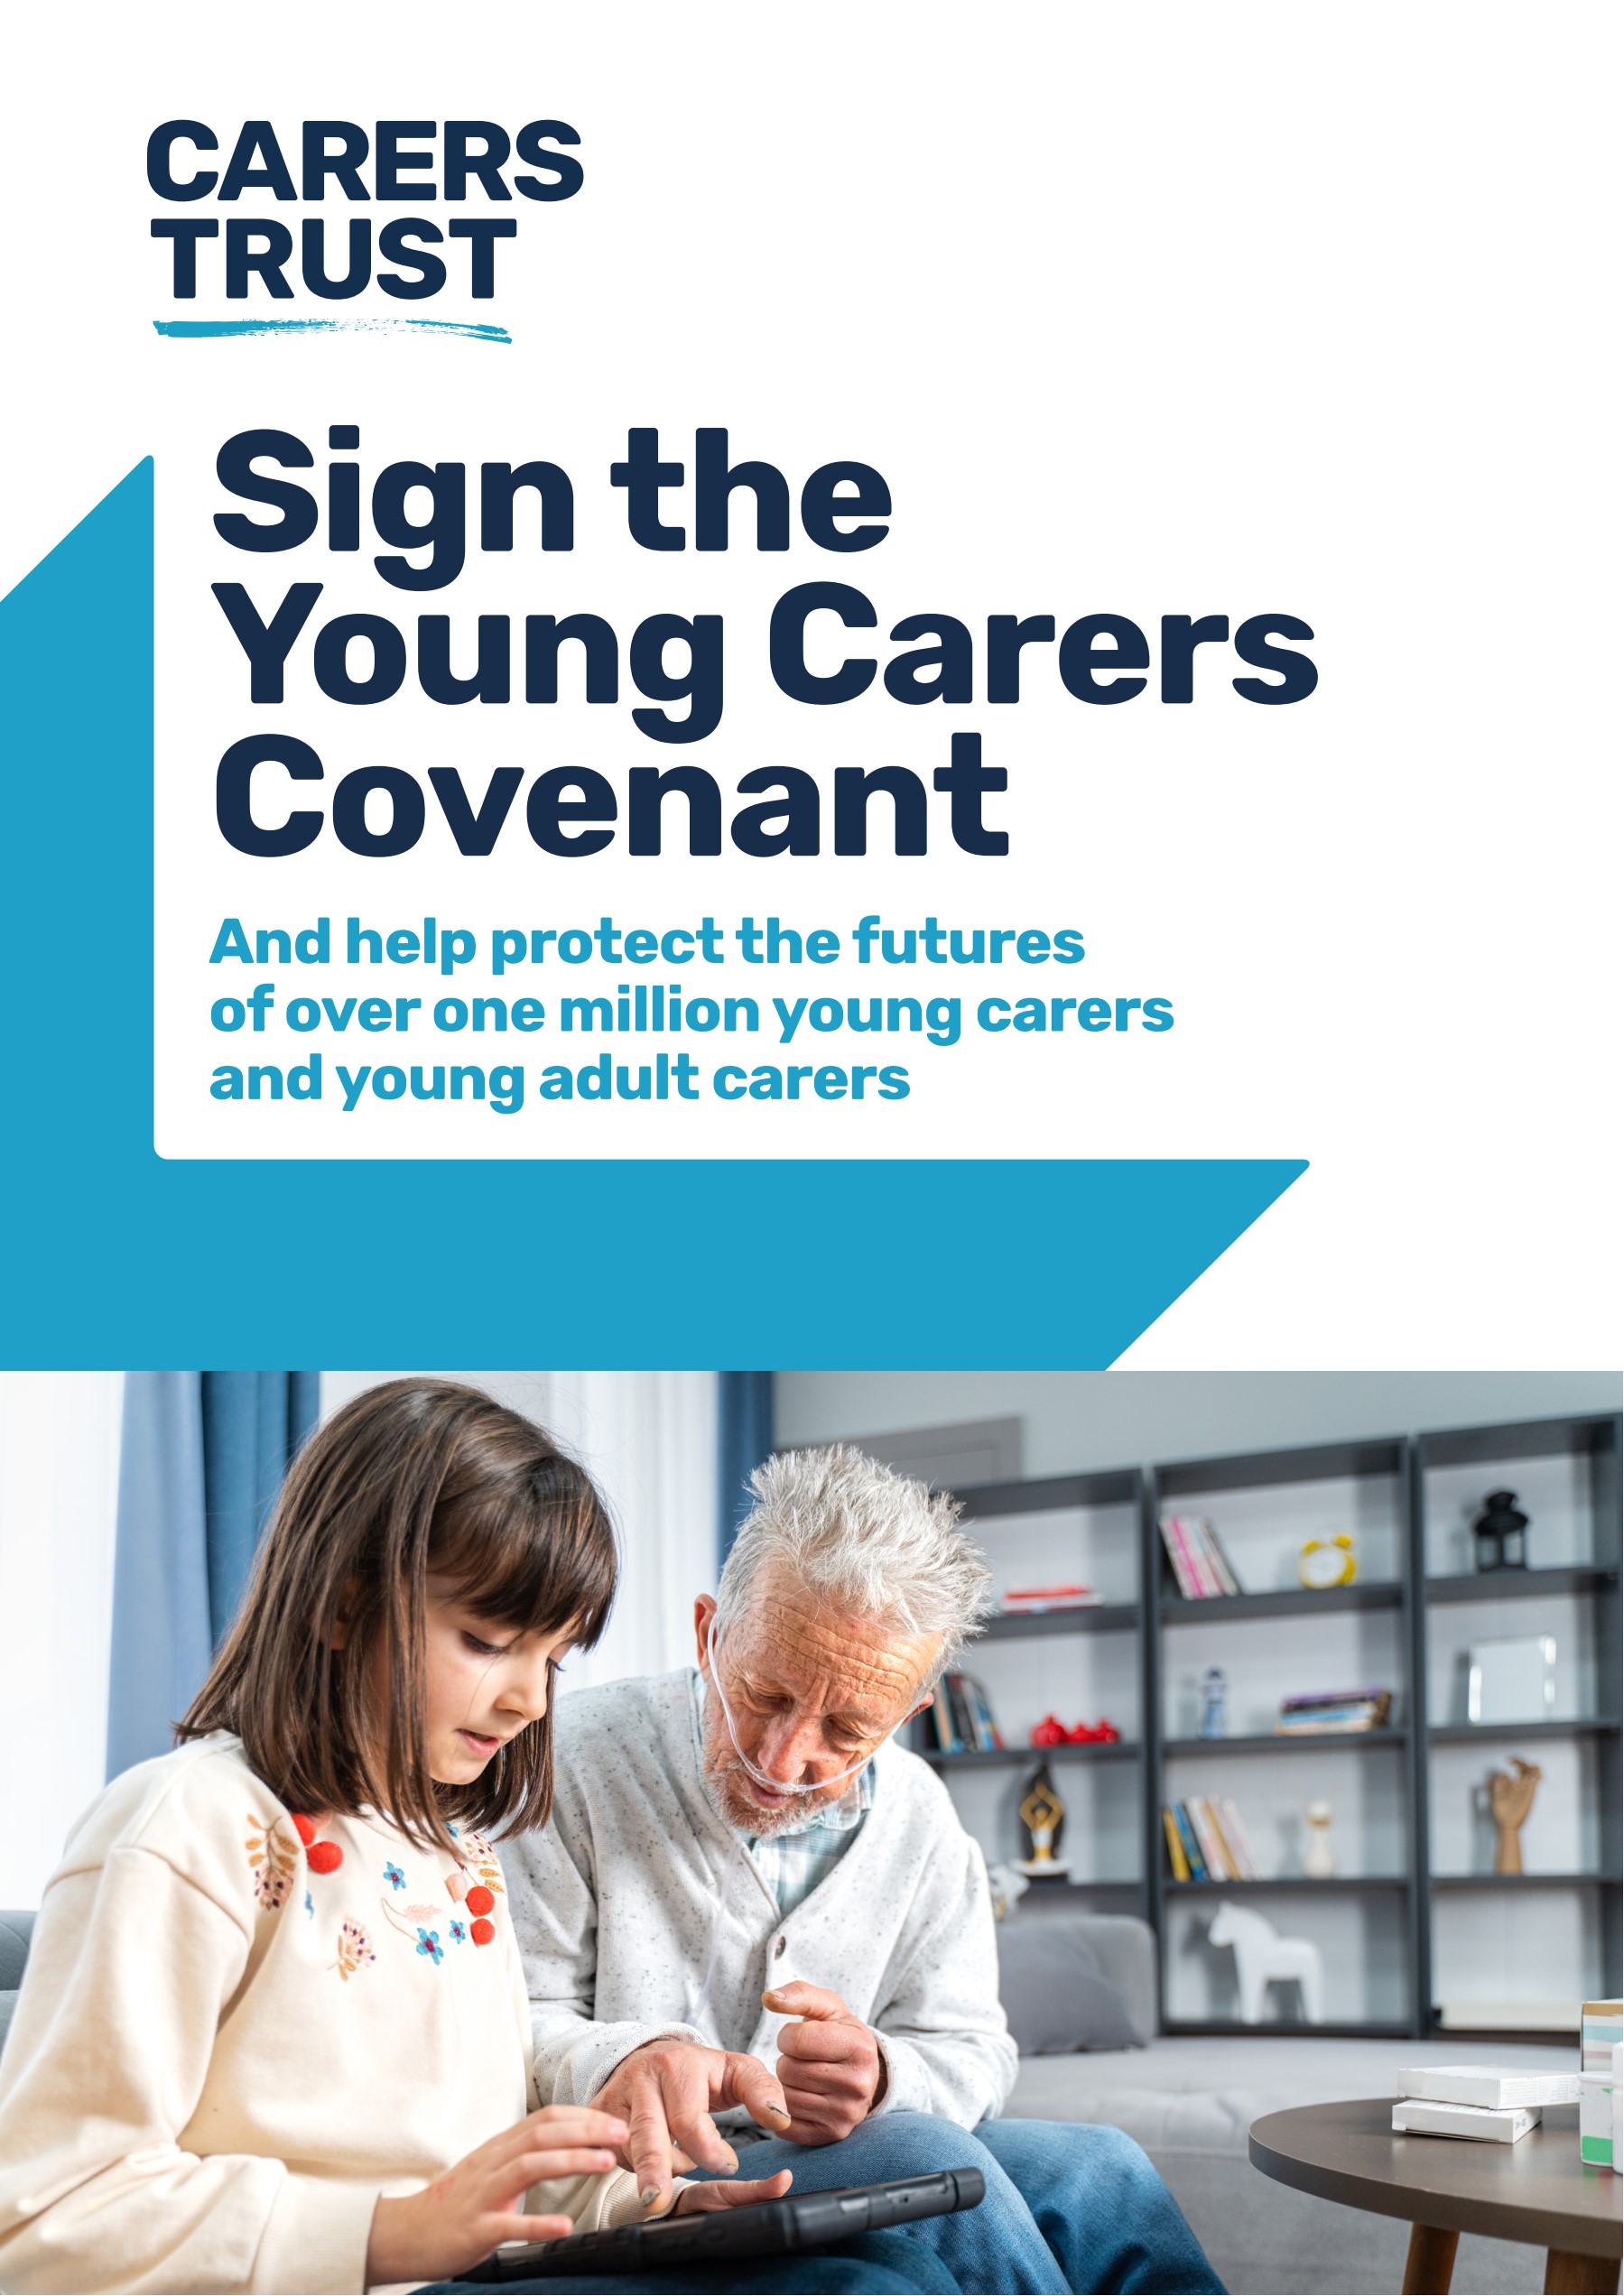 final-young-carers-covenant.jpg (521 KB)